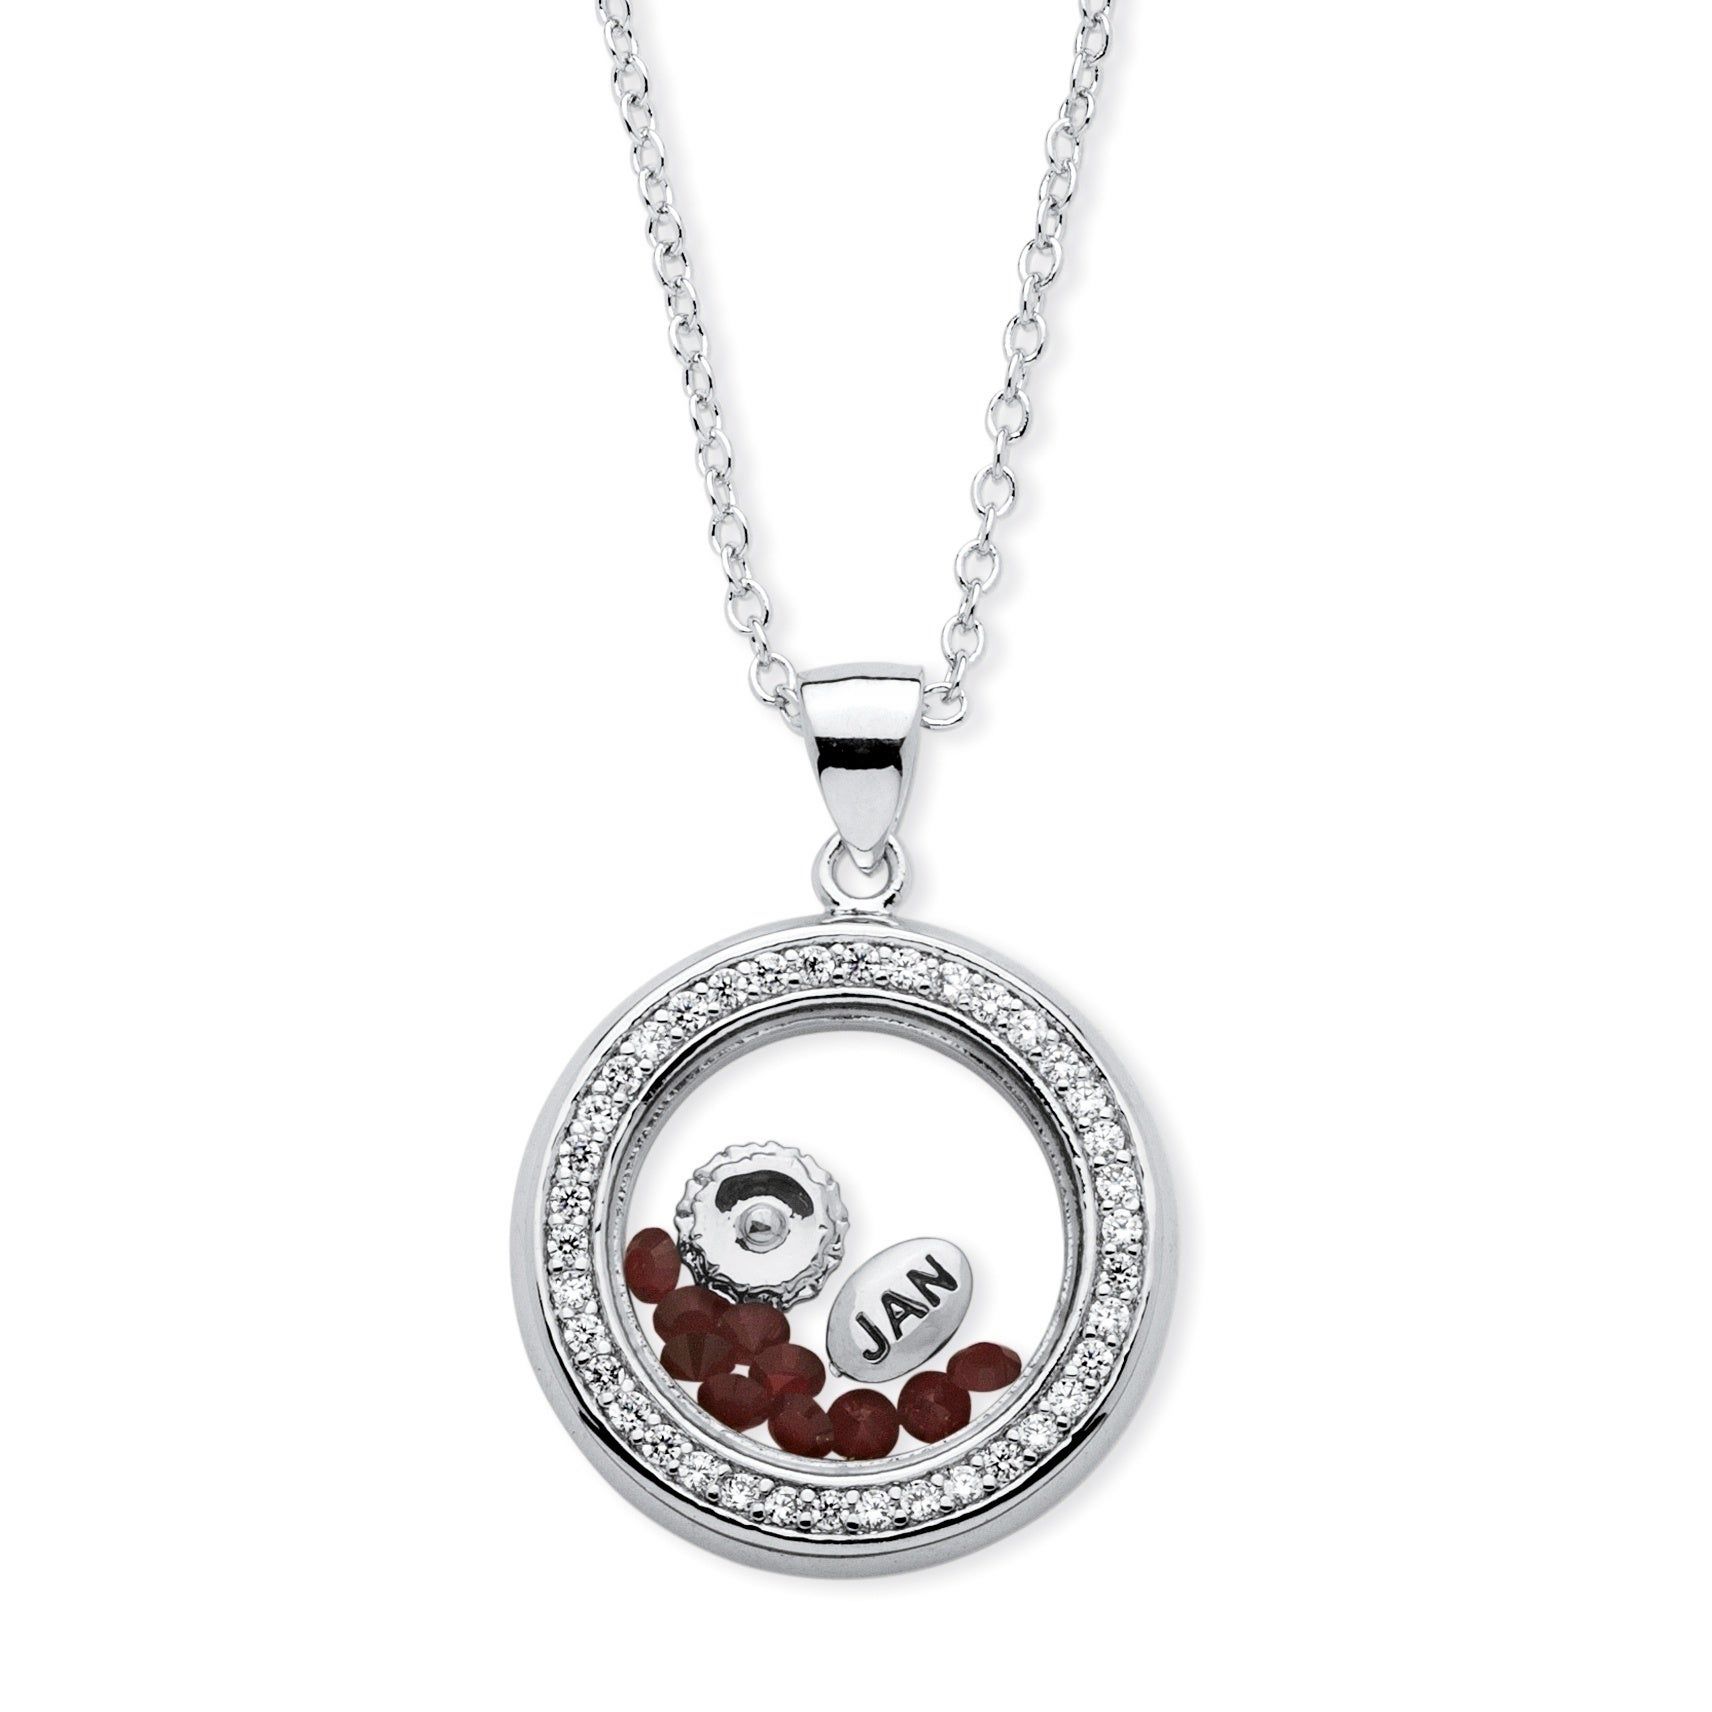 Silver Tone Charm Pendant (22mm) Round Cubic Zirconia And Round Simulated  And Blue Made With Swarovski Elements For Most Current Garnet Red January Birthstone Locket Element Necklaces (View 20 of 25)